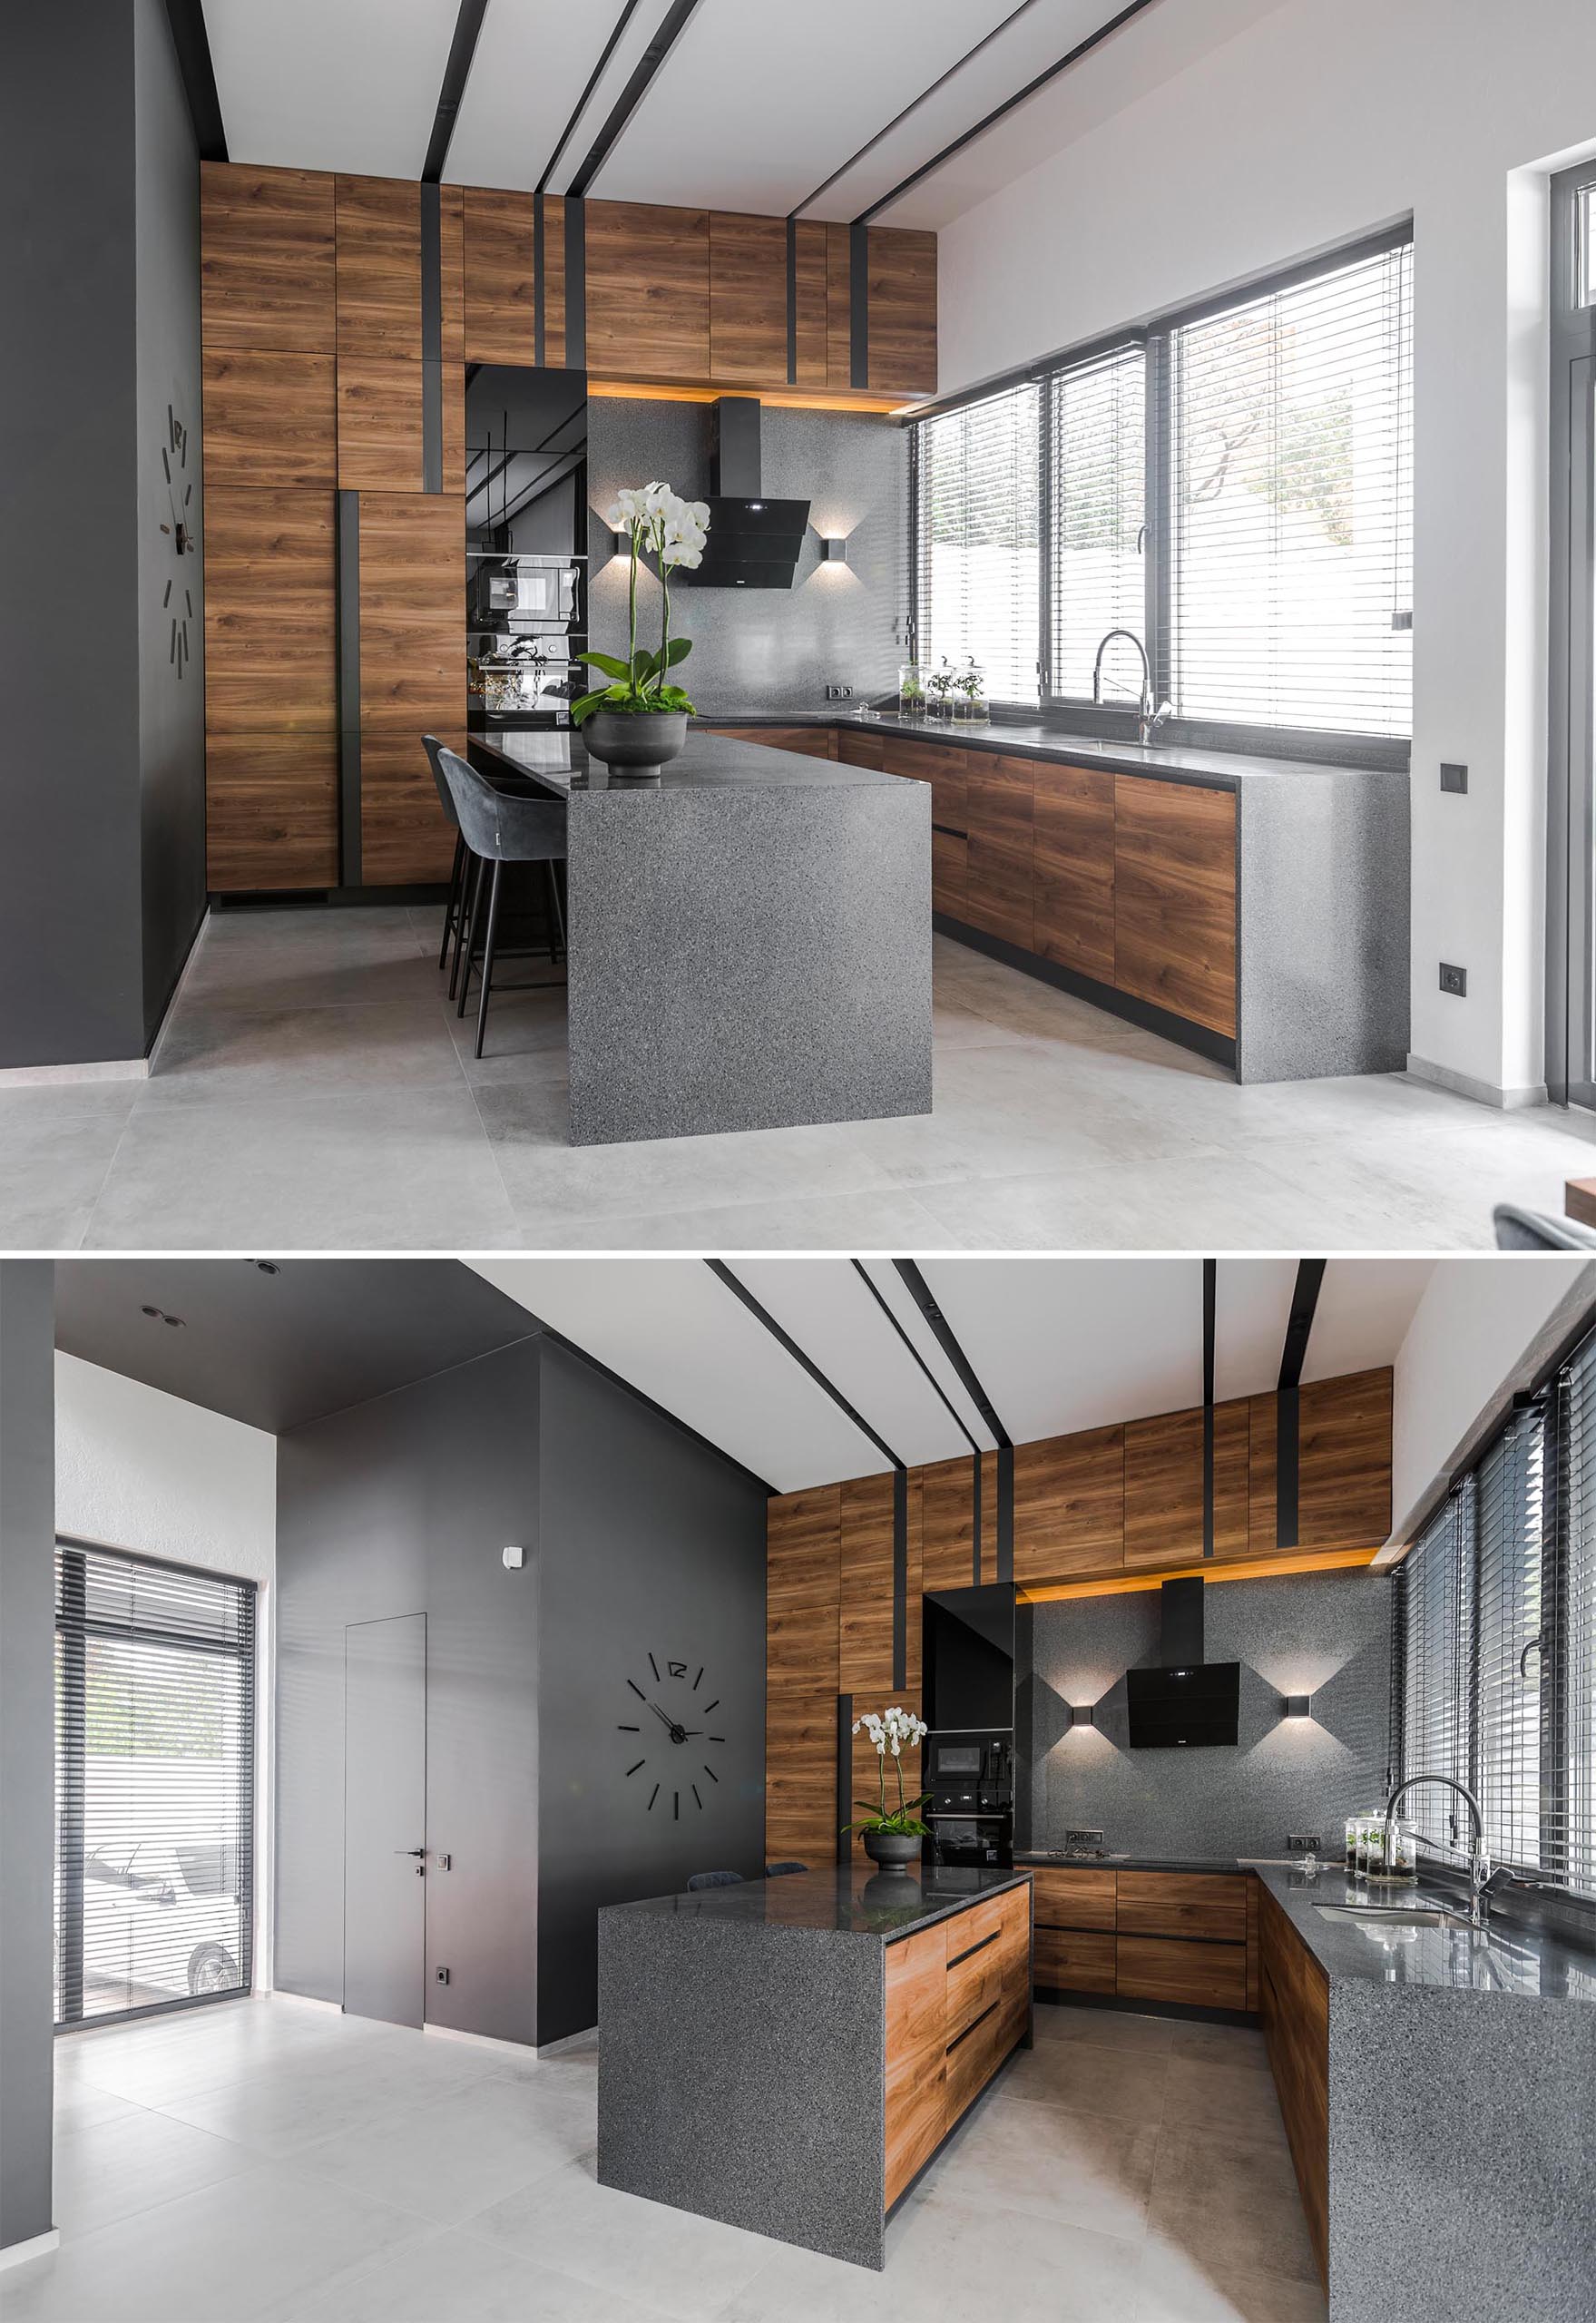 A modern gray, black, and wood kitchen with island.